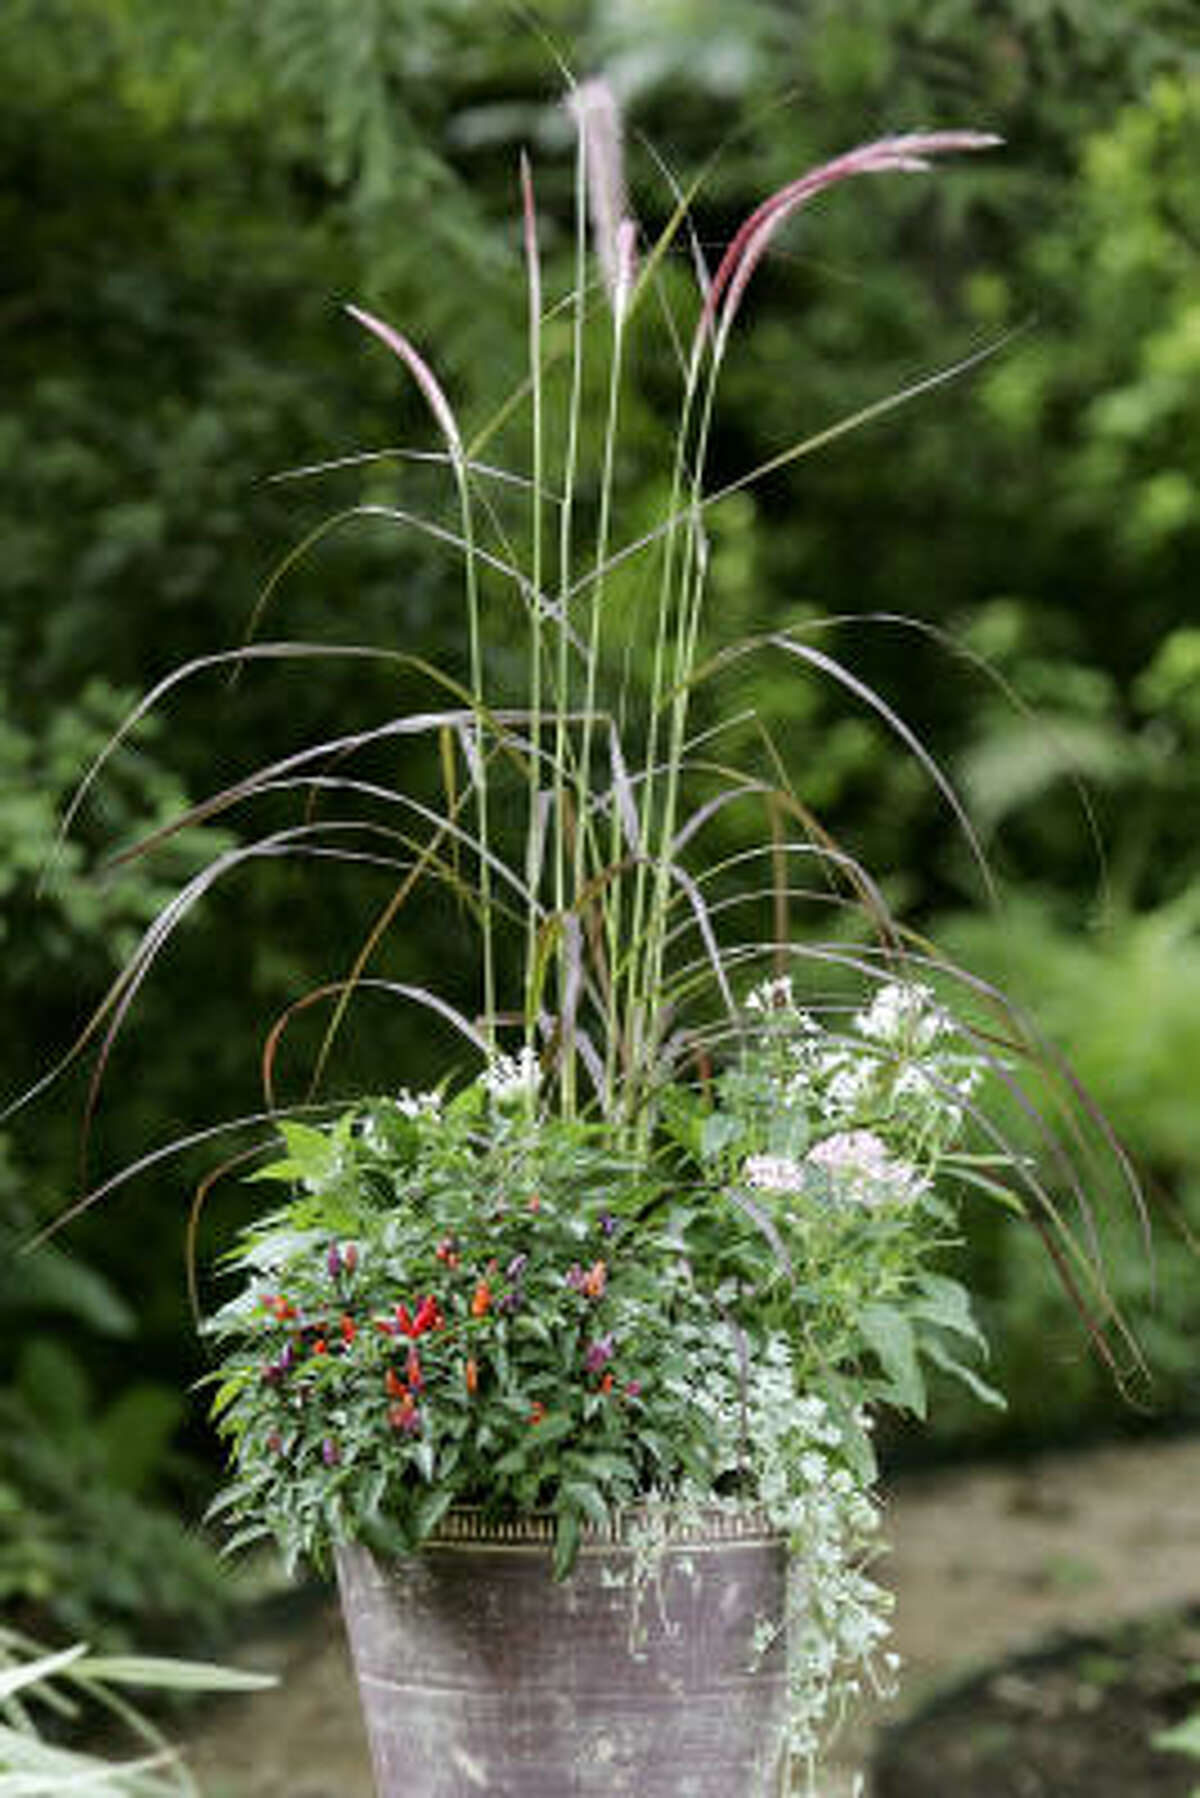 Plumes of purple fountain grass sway above pink and lavender pentas, purple ornamental peppers and cascading 'Silver Falls' dichondra.